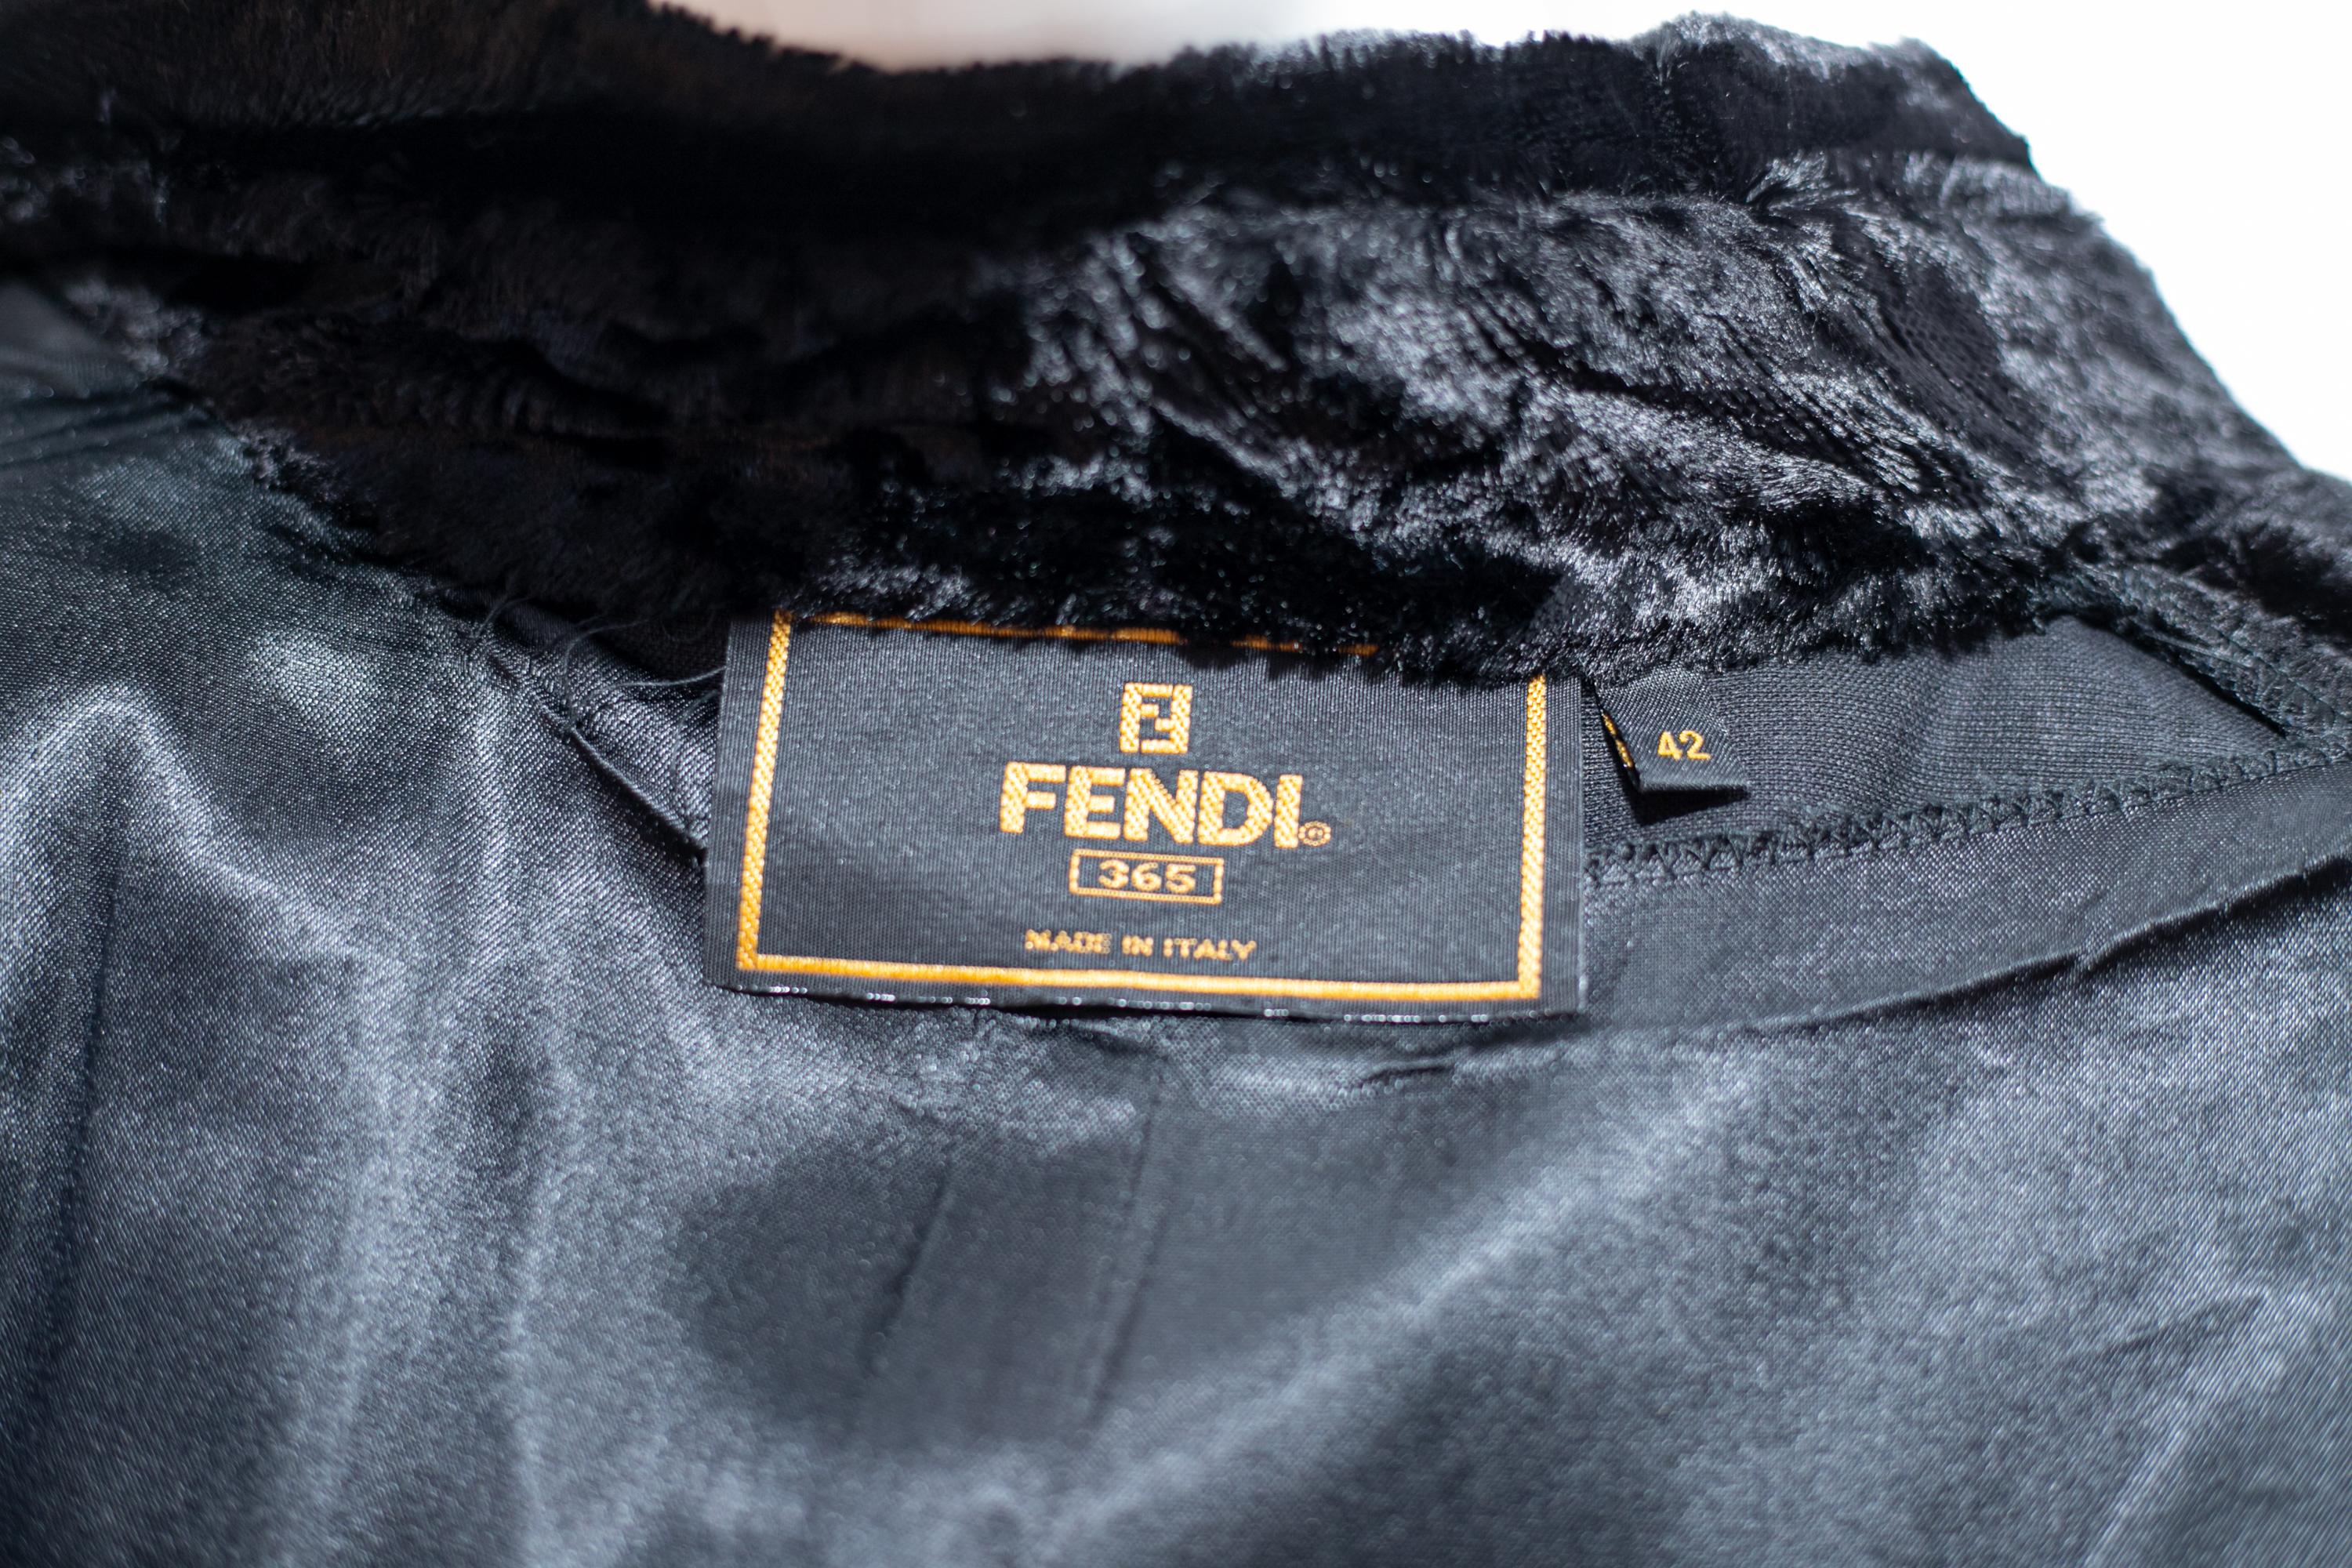 Superb black fur coat designed by Fendi in the 1980s, made in Italy. Original inner label.
The fur is entirely made of black lapin and has a substantial length, up to above the knee.
The fur has a fascinating spotted weave, which, with the effect of